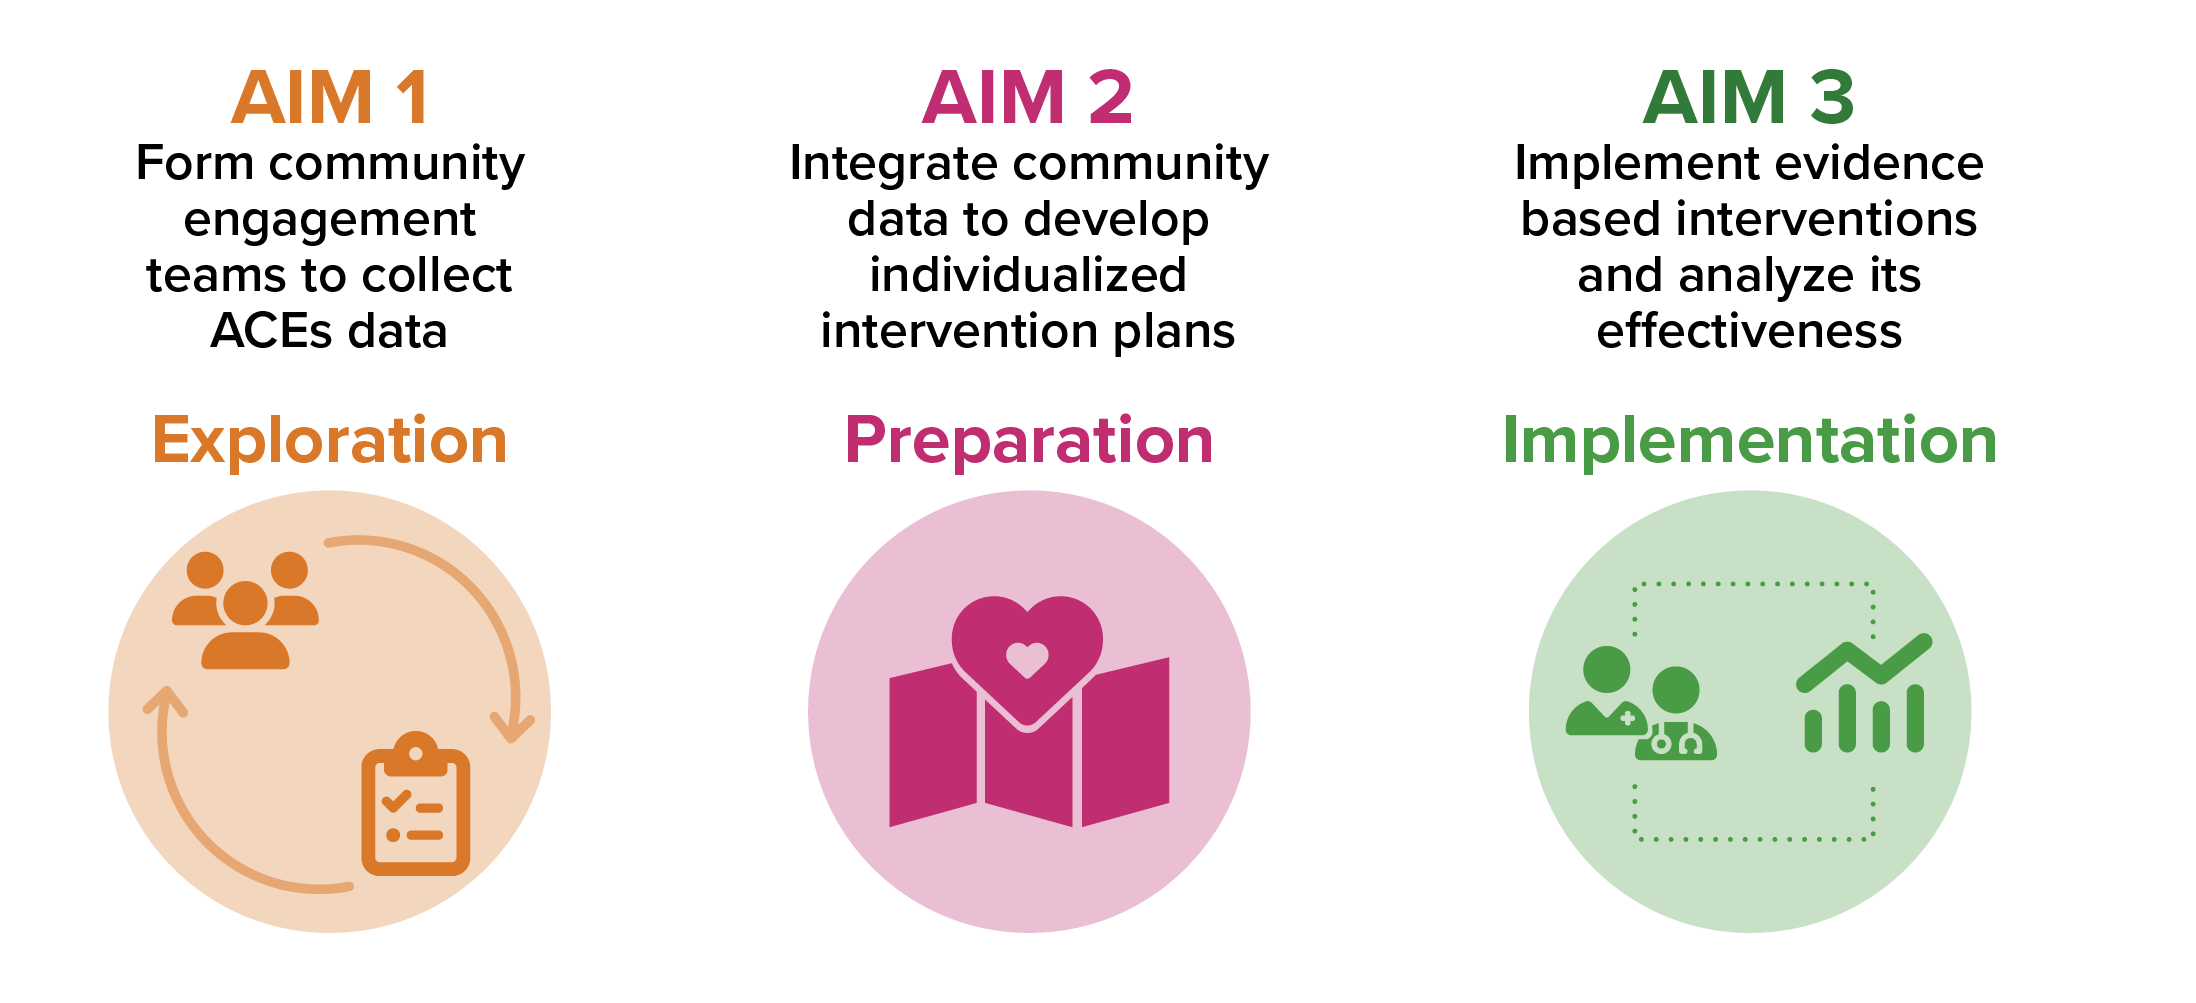 This graphic describes the goals of the project. The project goals are to form community engagement teams that collect ACEs data, integrate this data to develop individualized intervention plans, and implement these interventions and then analyze its effectiveness.